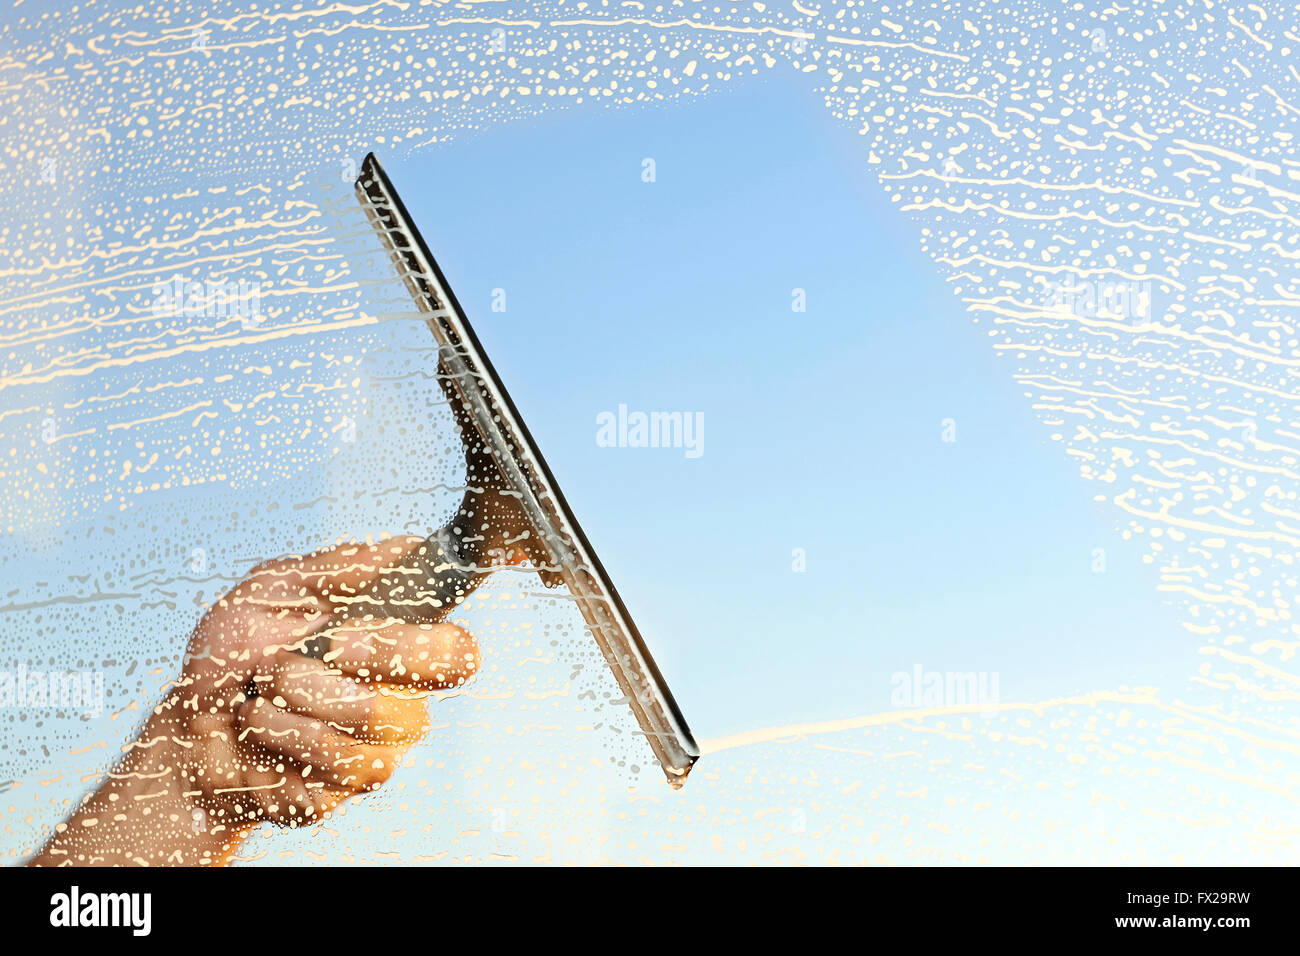 Hand washing and cleaning window with professionally squeegee portable  vacuum cleaner. Maid cleans window Stock Photo - Alamy